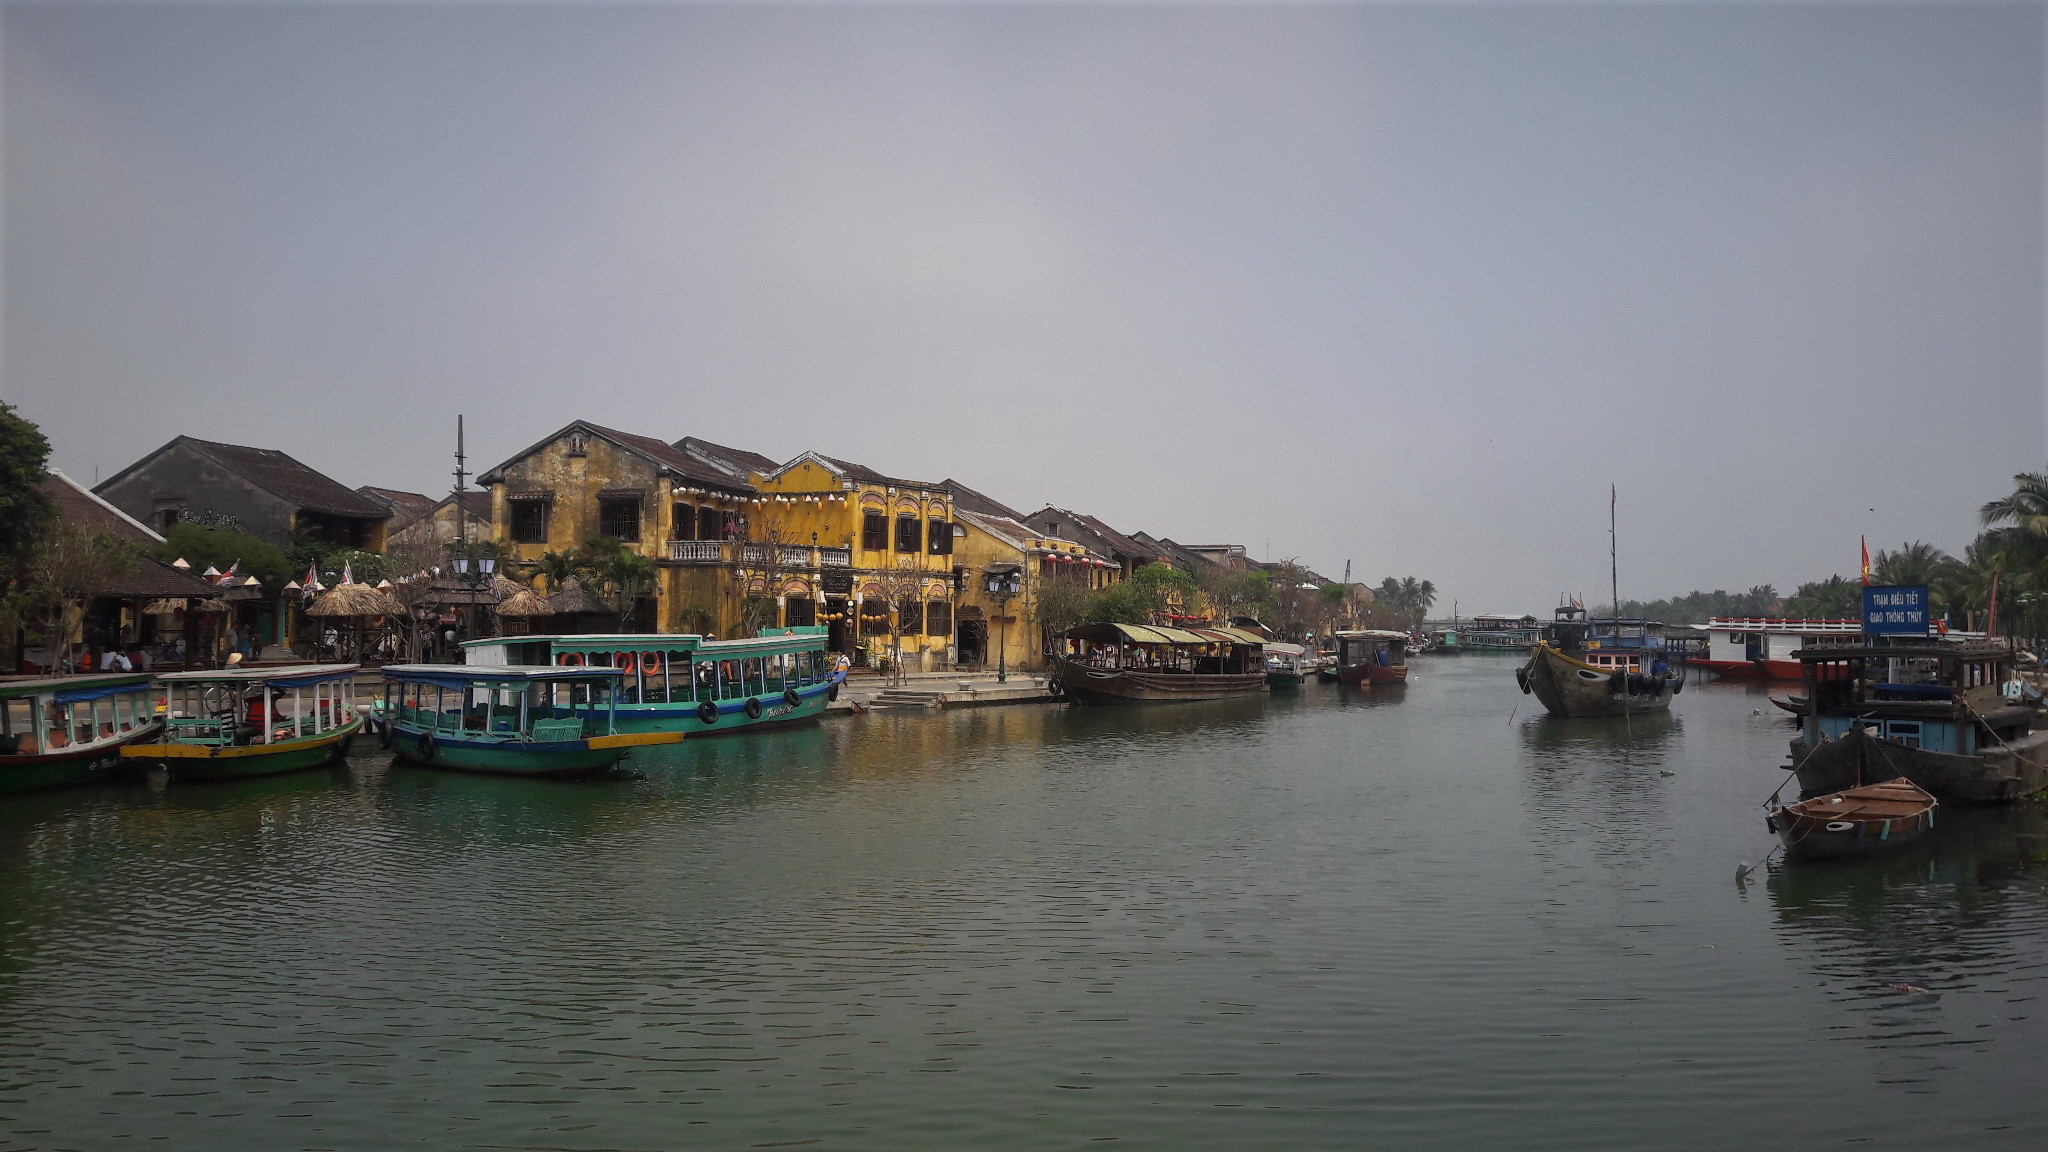 Hoi An Ancient Town by the river